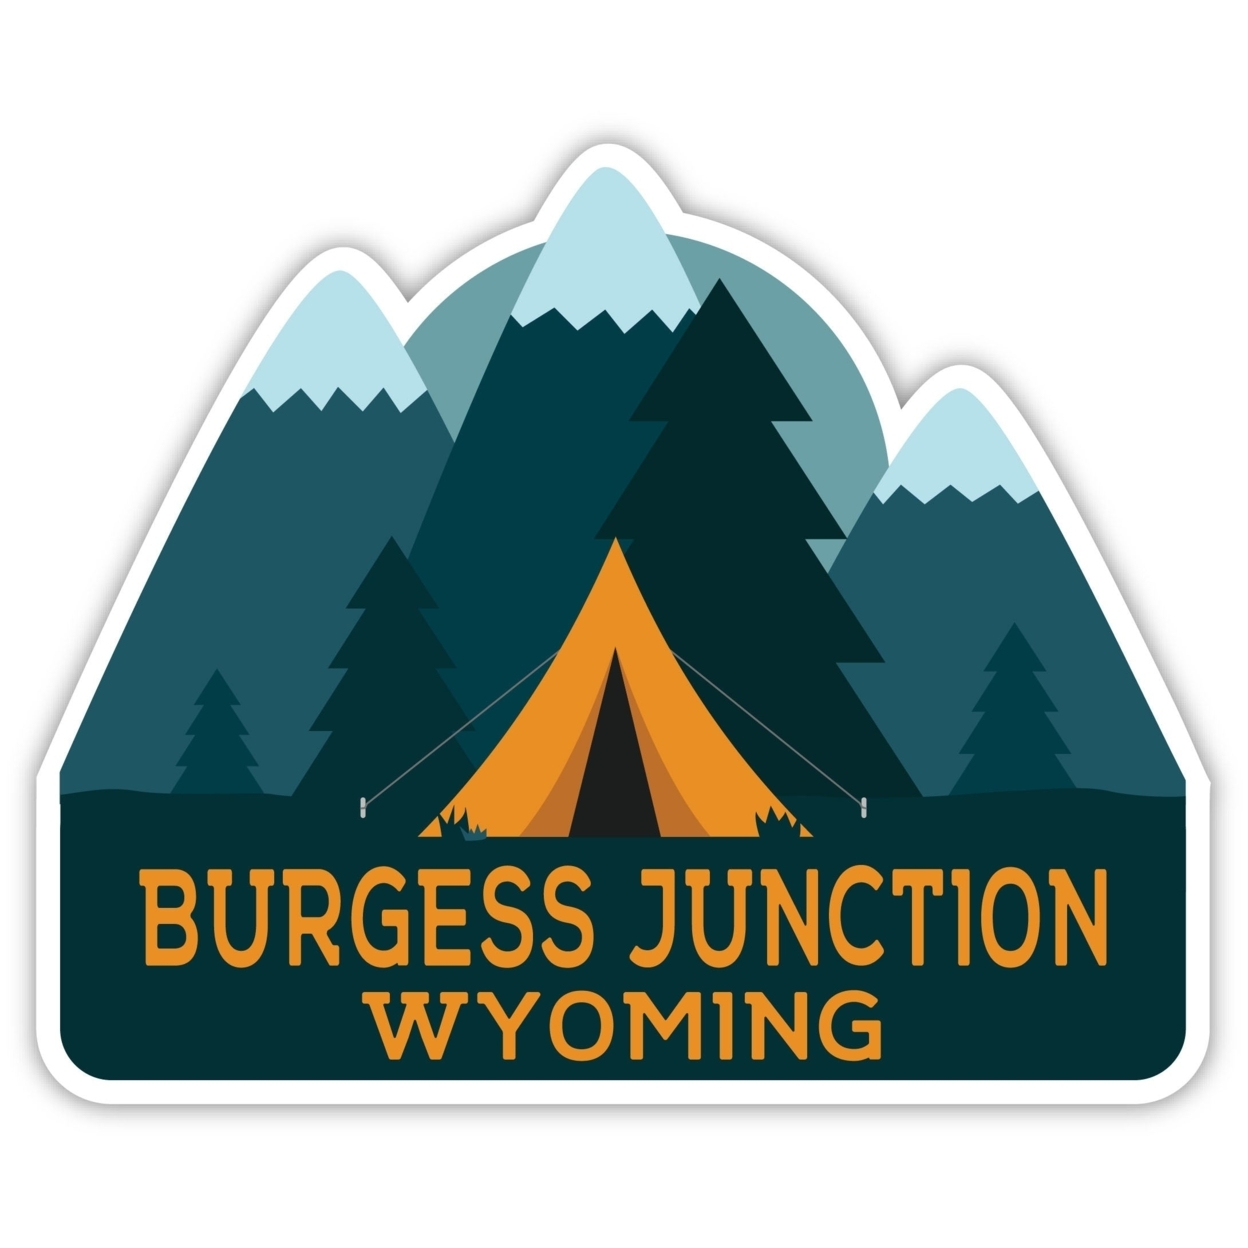 Burgess Junction Wyoming Souvenir Decorative Stickers (Choose Theme And Size) - 4-Pack, 12-Inch, Tent